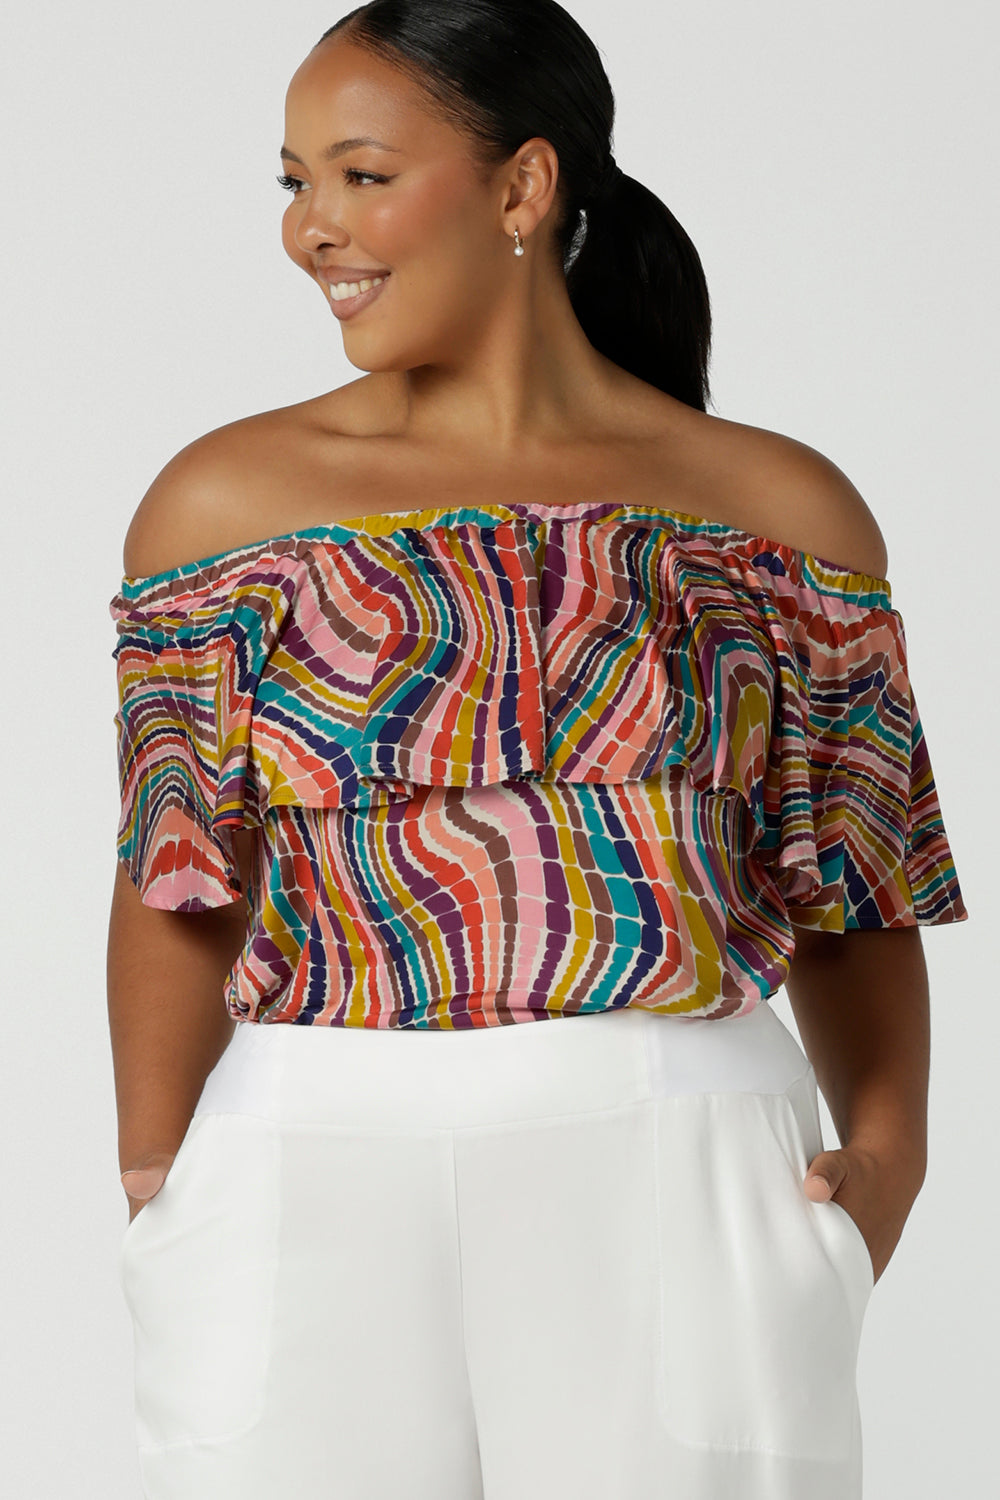 Curvy size 16 woman wears an off shoulder top in vibrant rainbow swirl Briar top in soft slinky jersey. Made in Australia for women size 8 - 24.